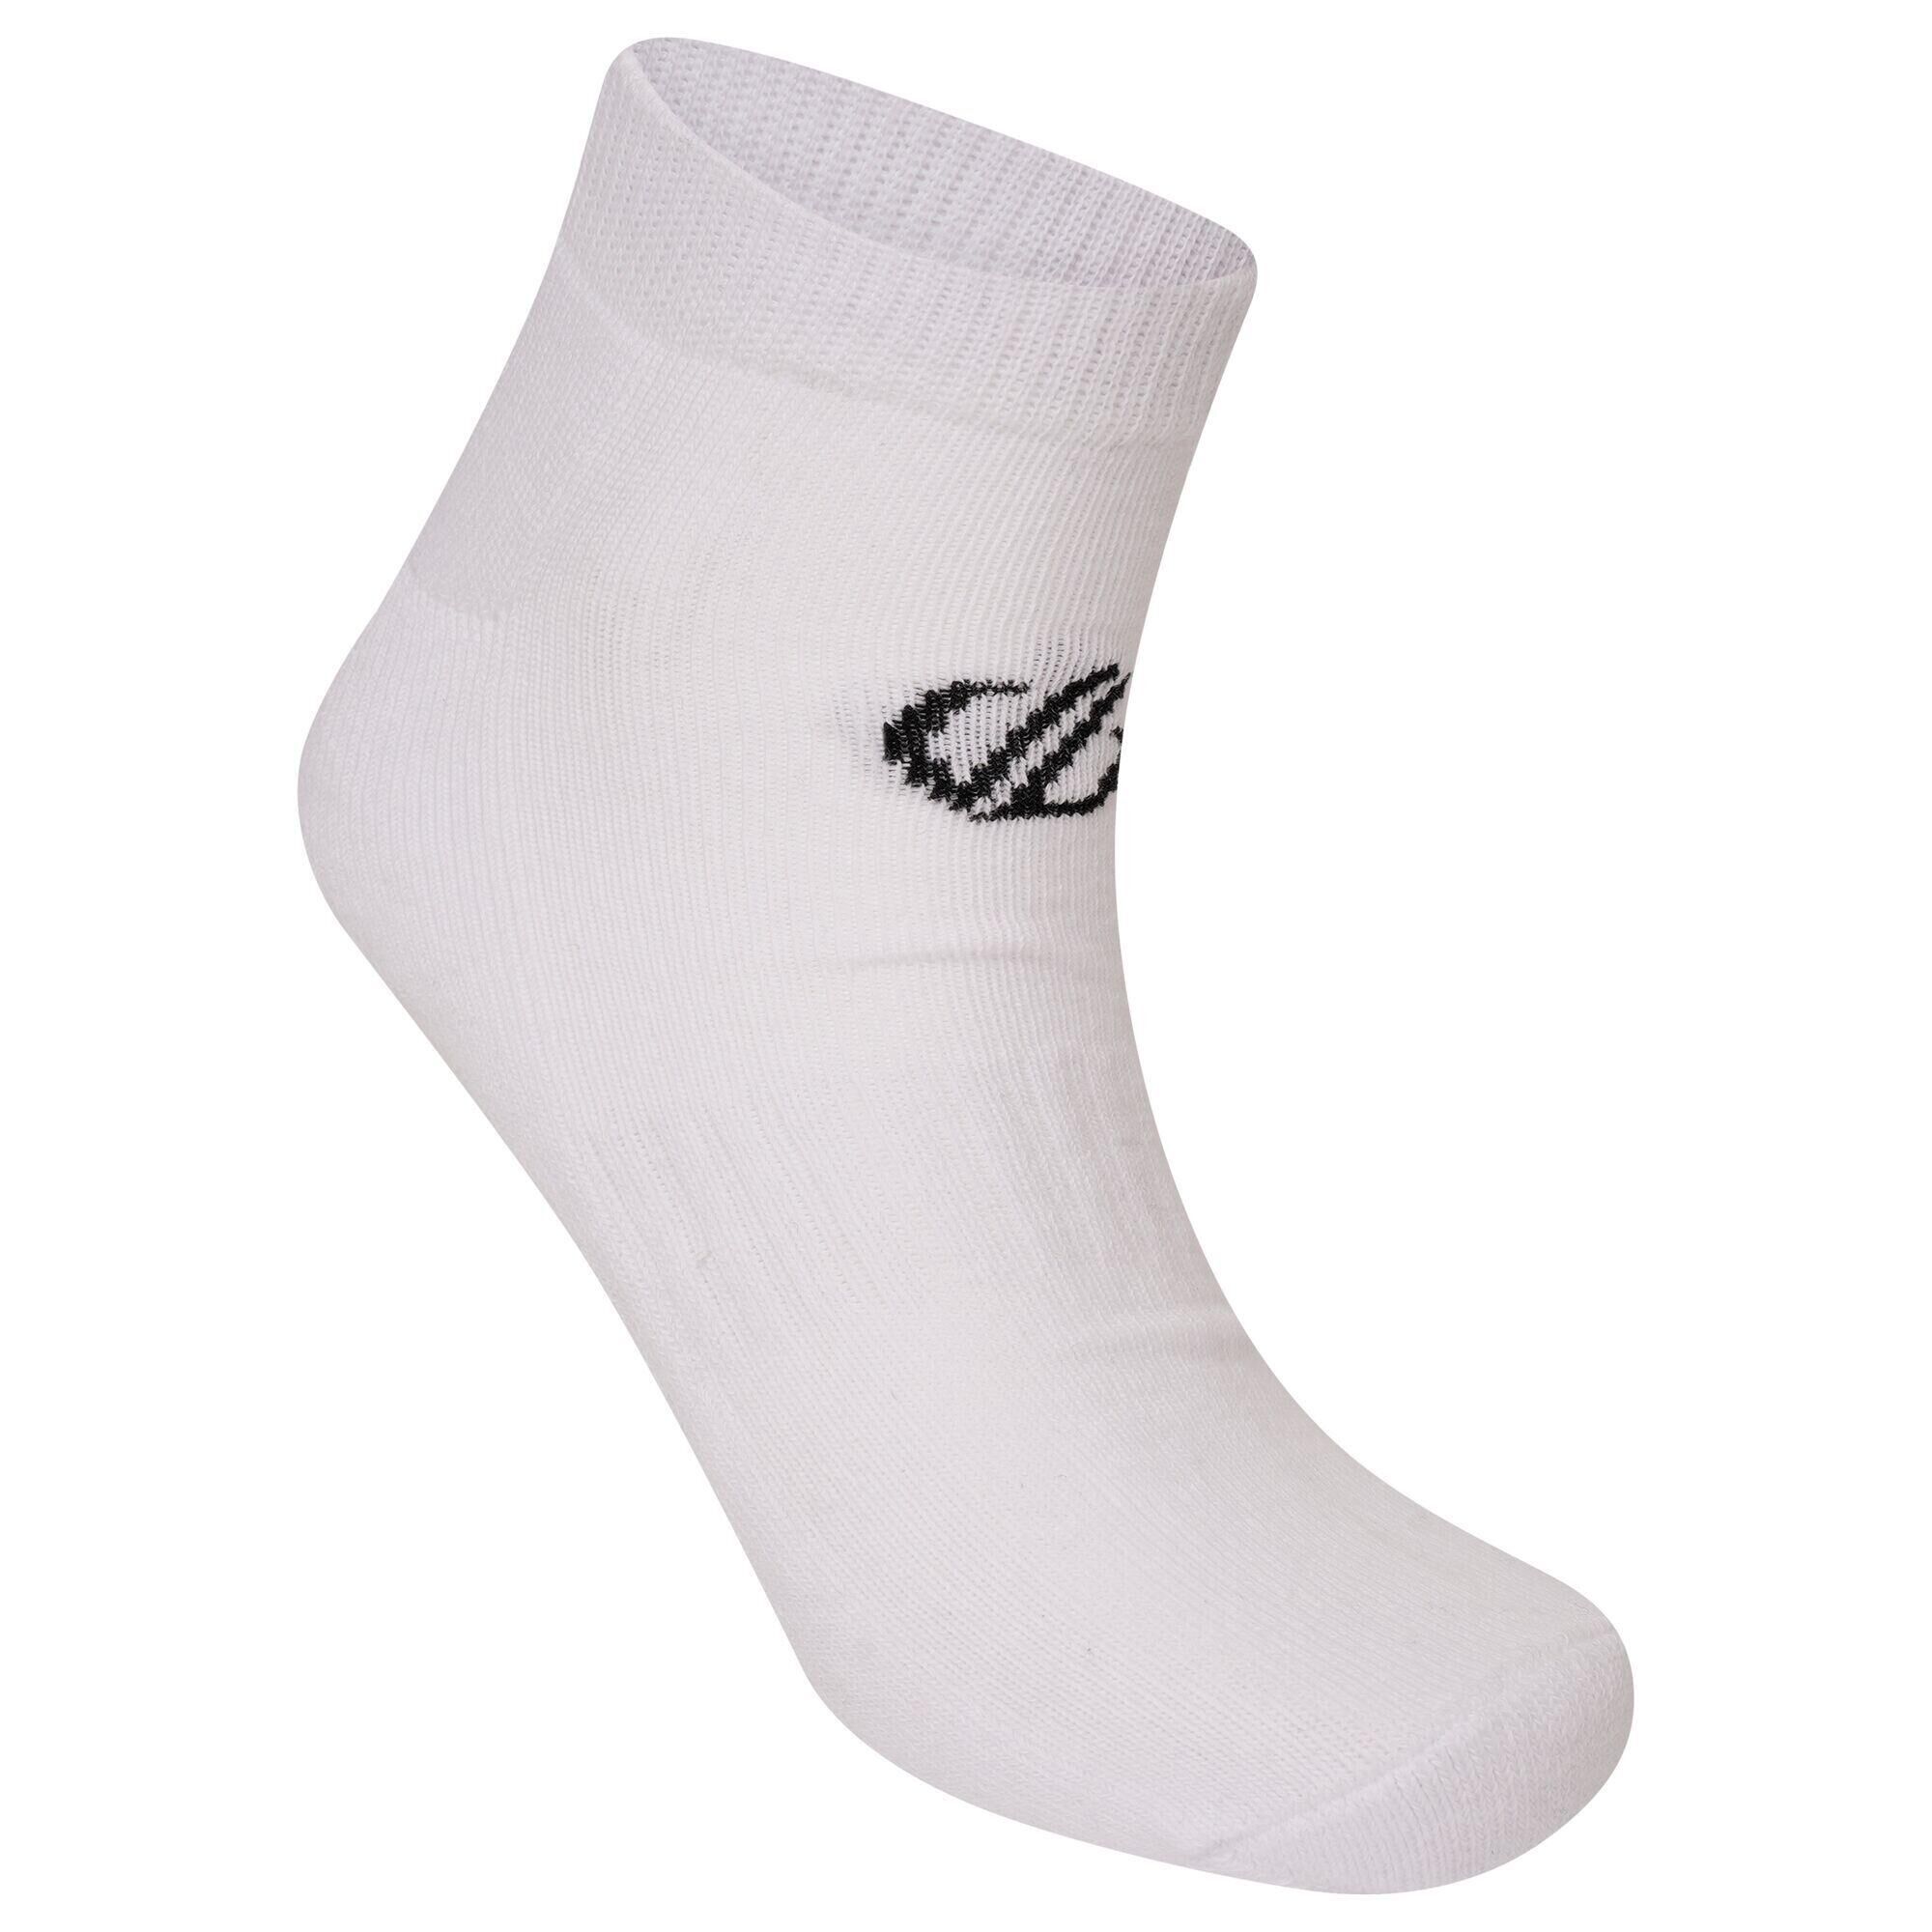 DARE 2B Unisex Adult Essentials Ankle Socks (Pack of 2) (White)